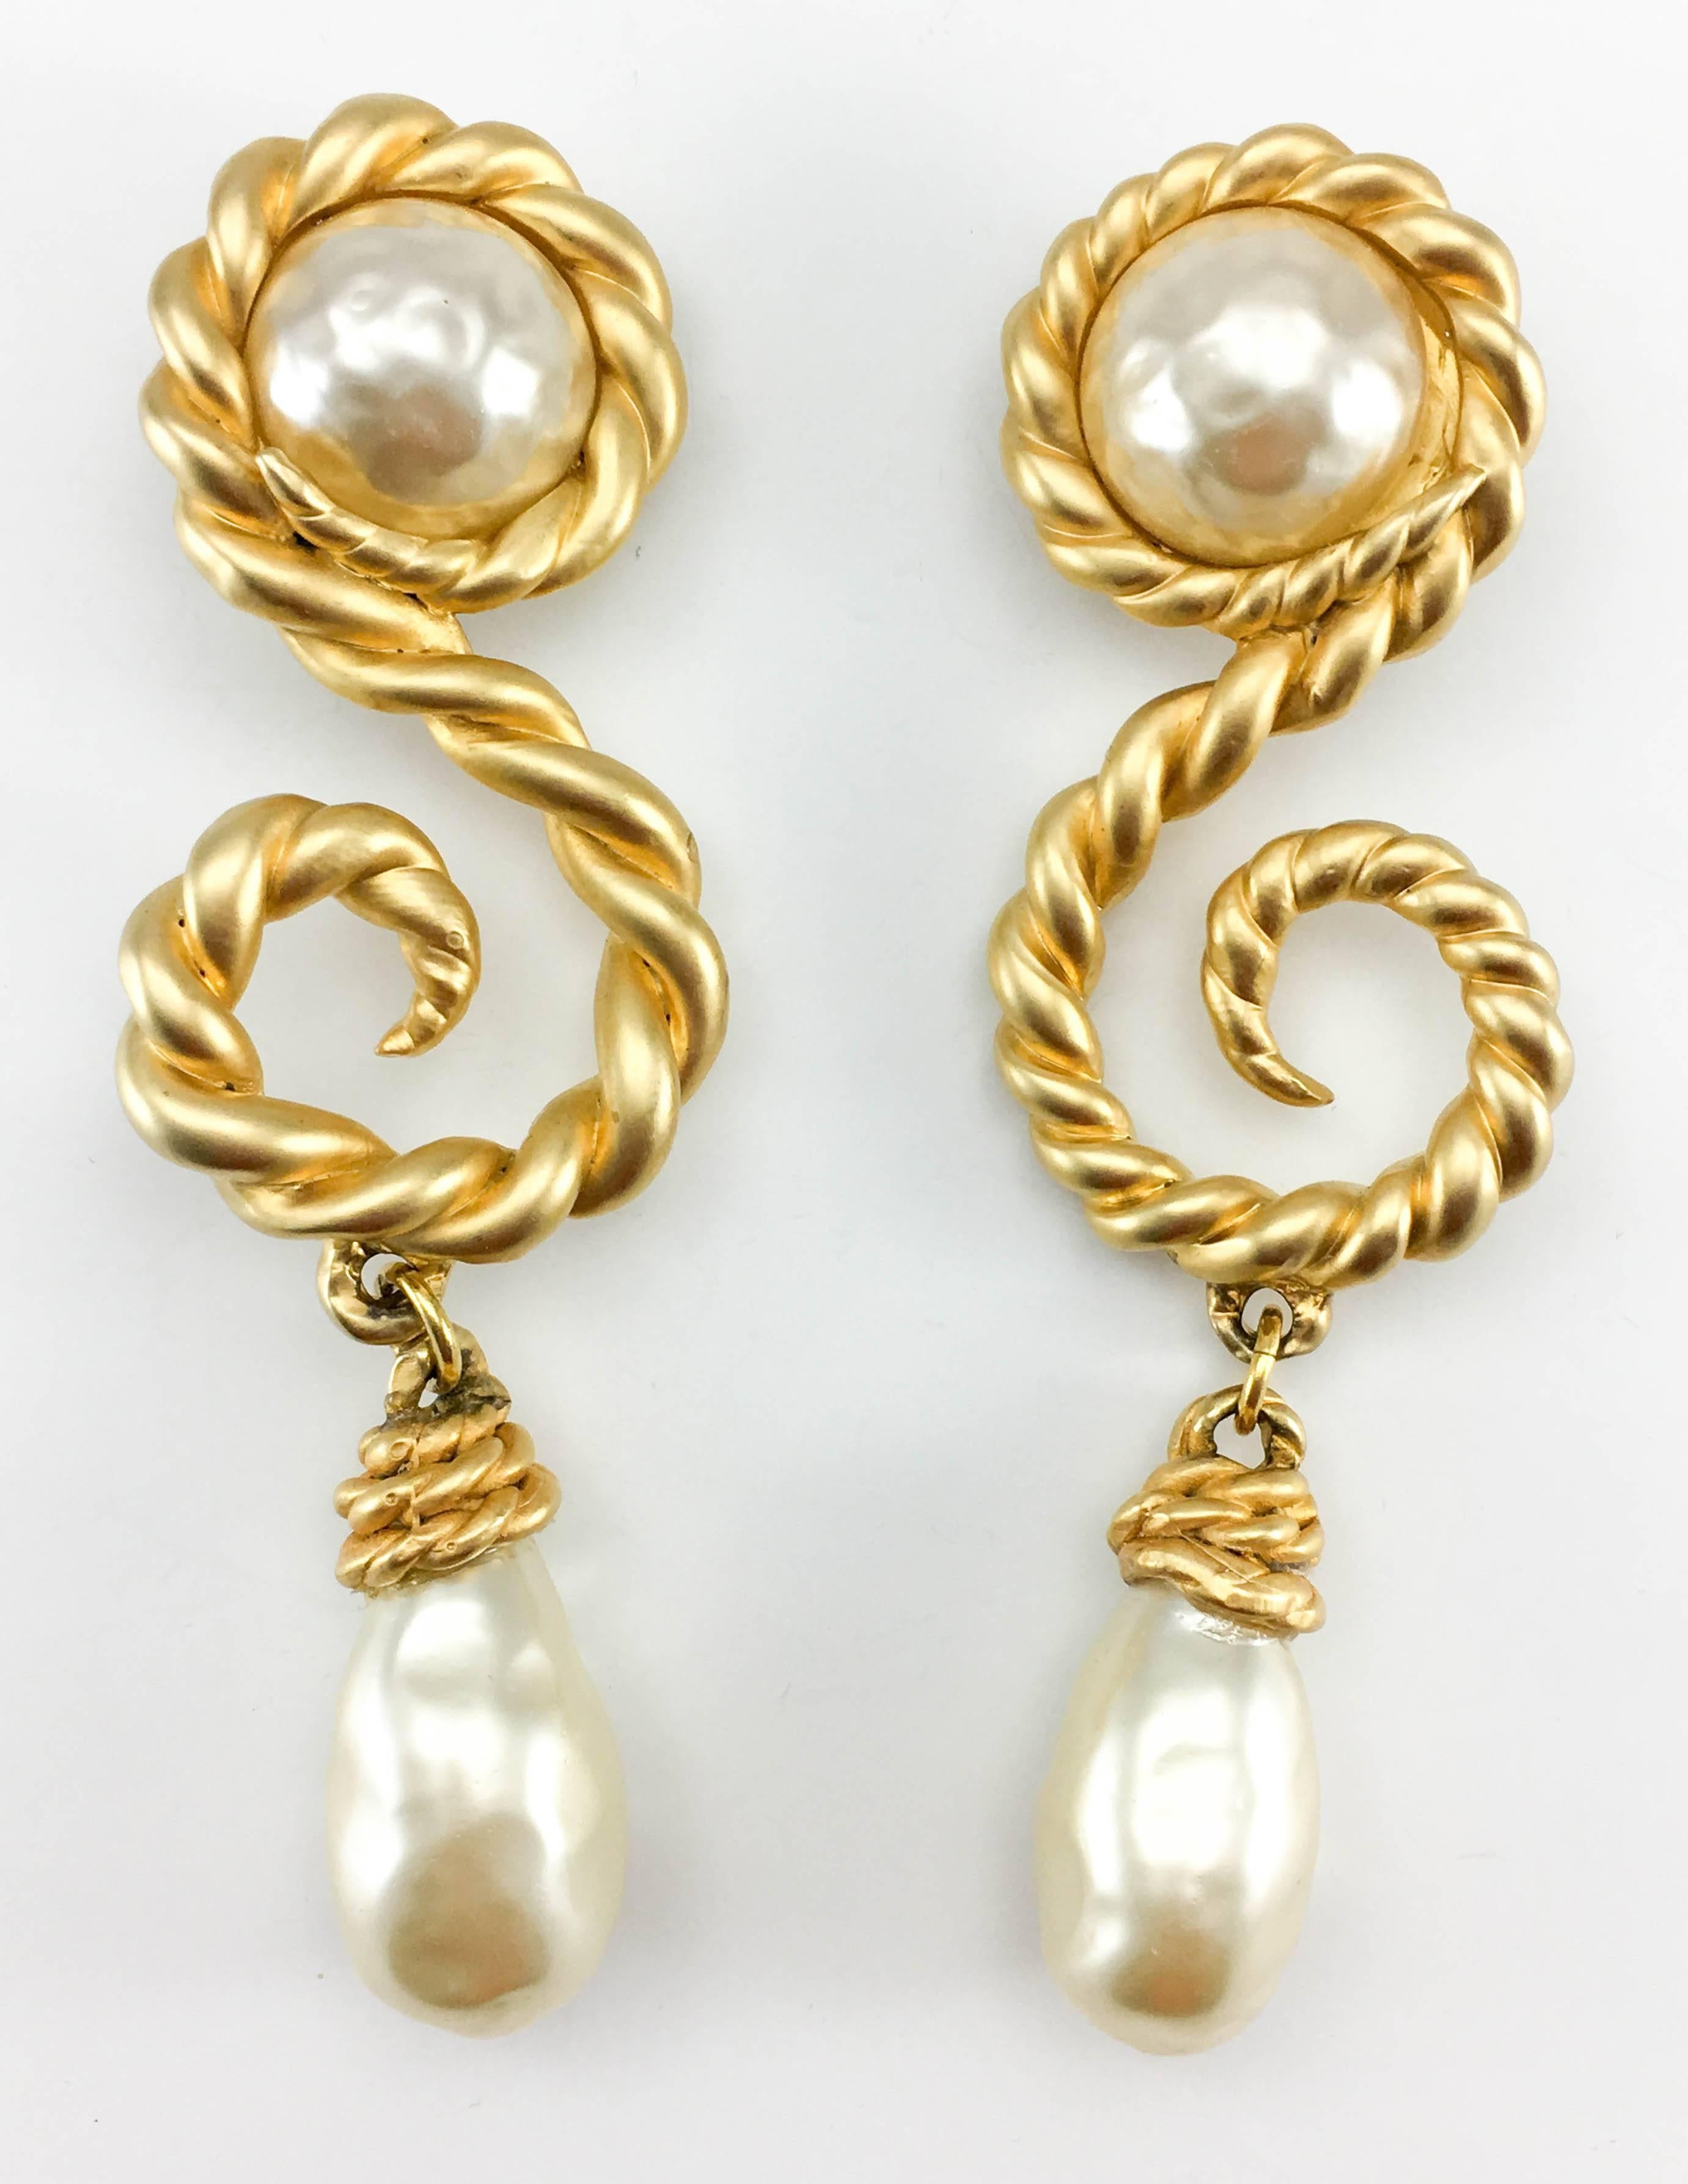 Chanel 1990 Runway Look Massive Arabesque and Baroque Pearl Earrings 1